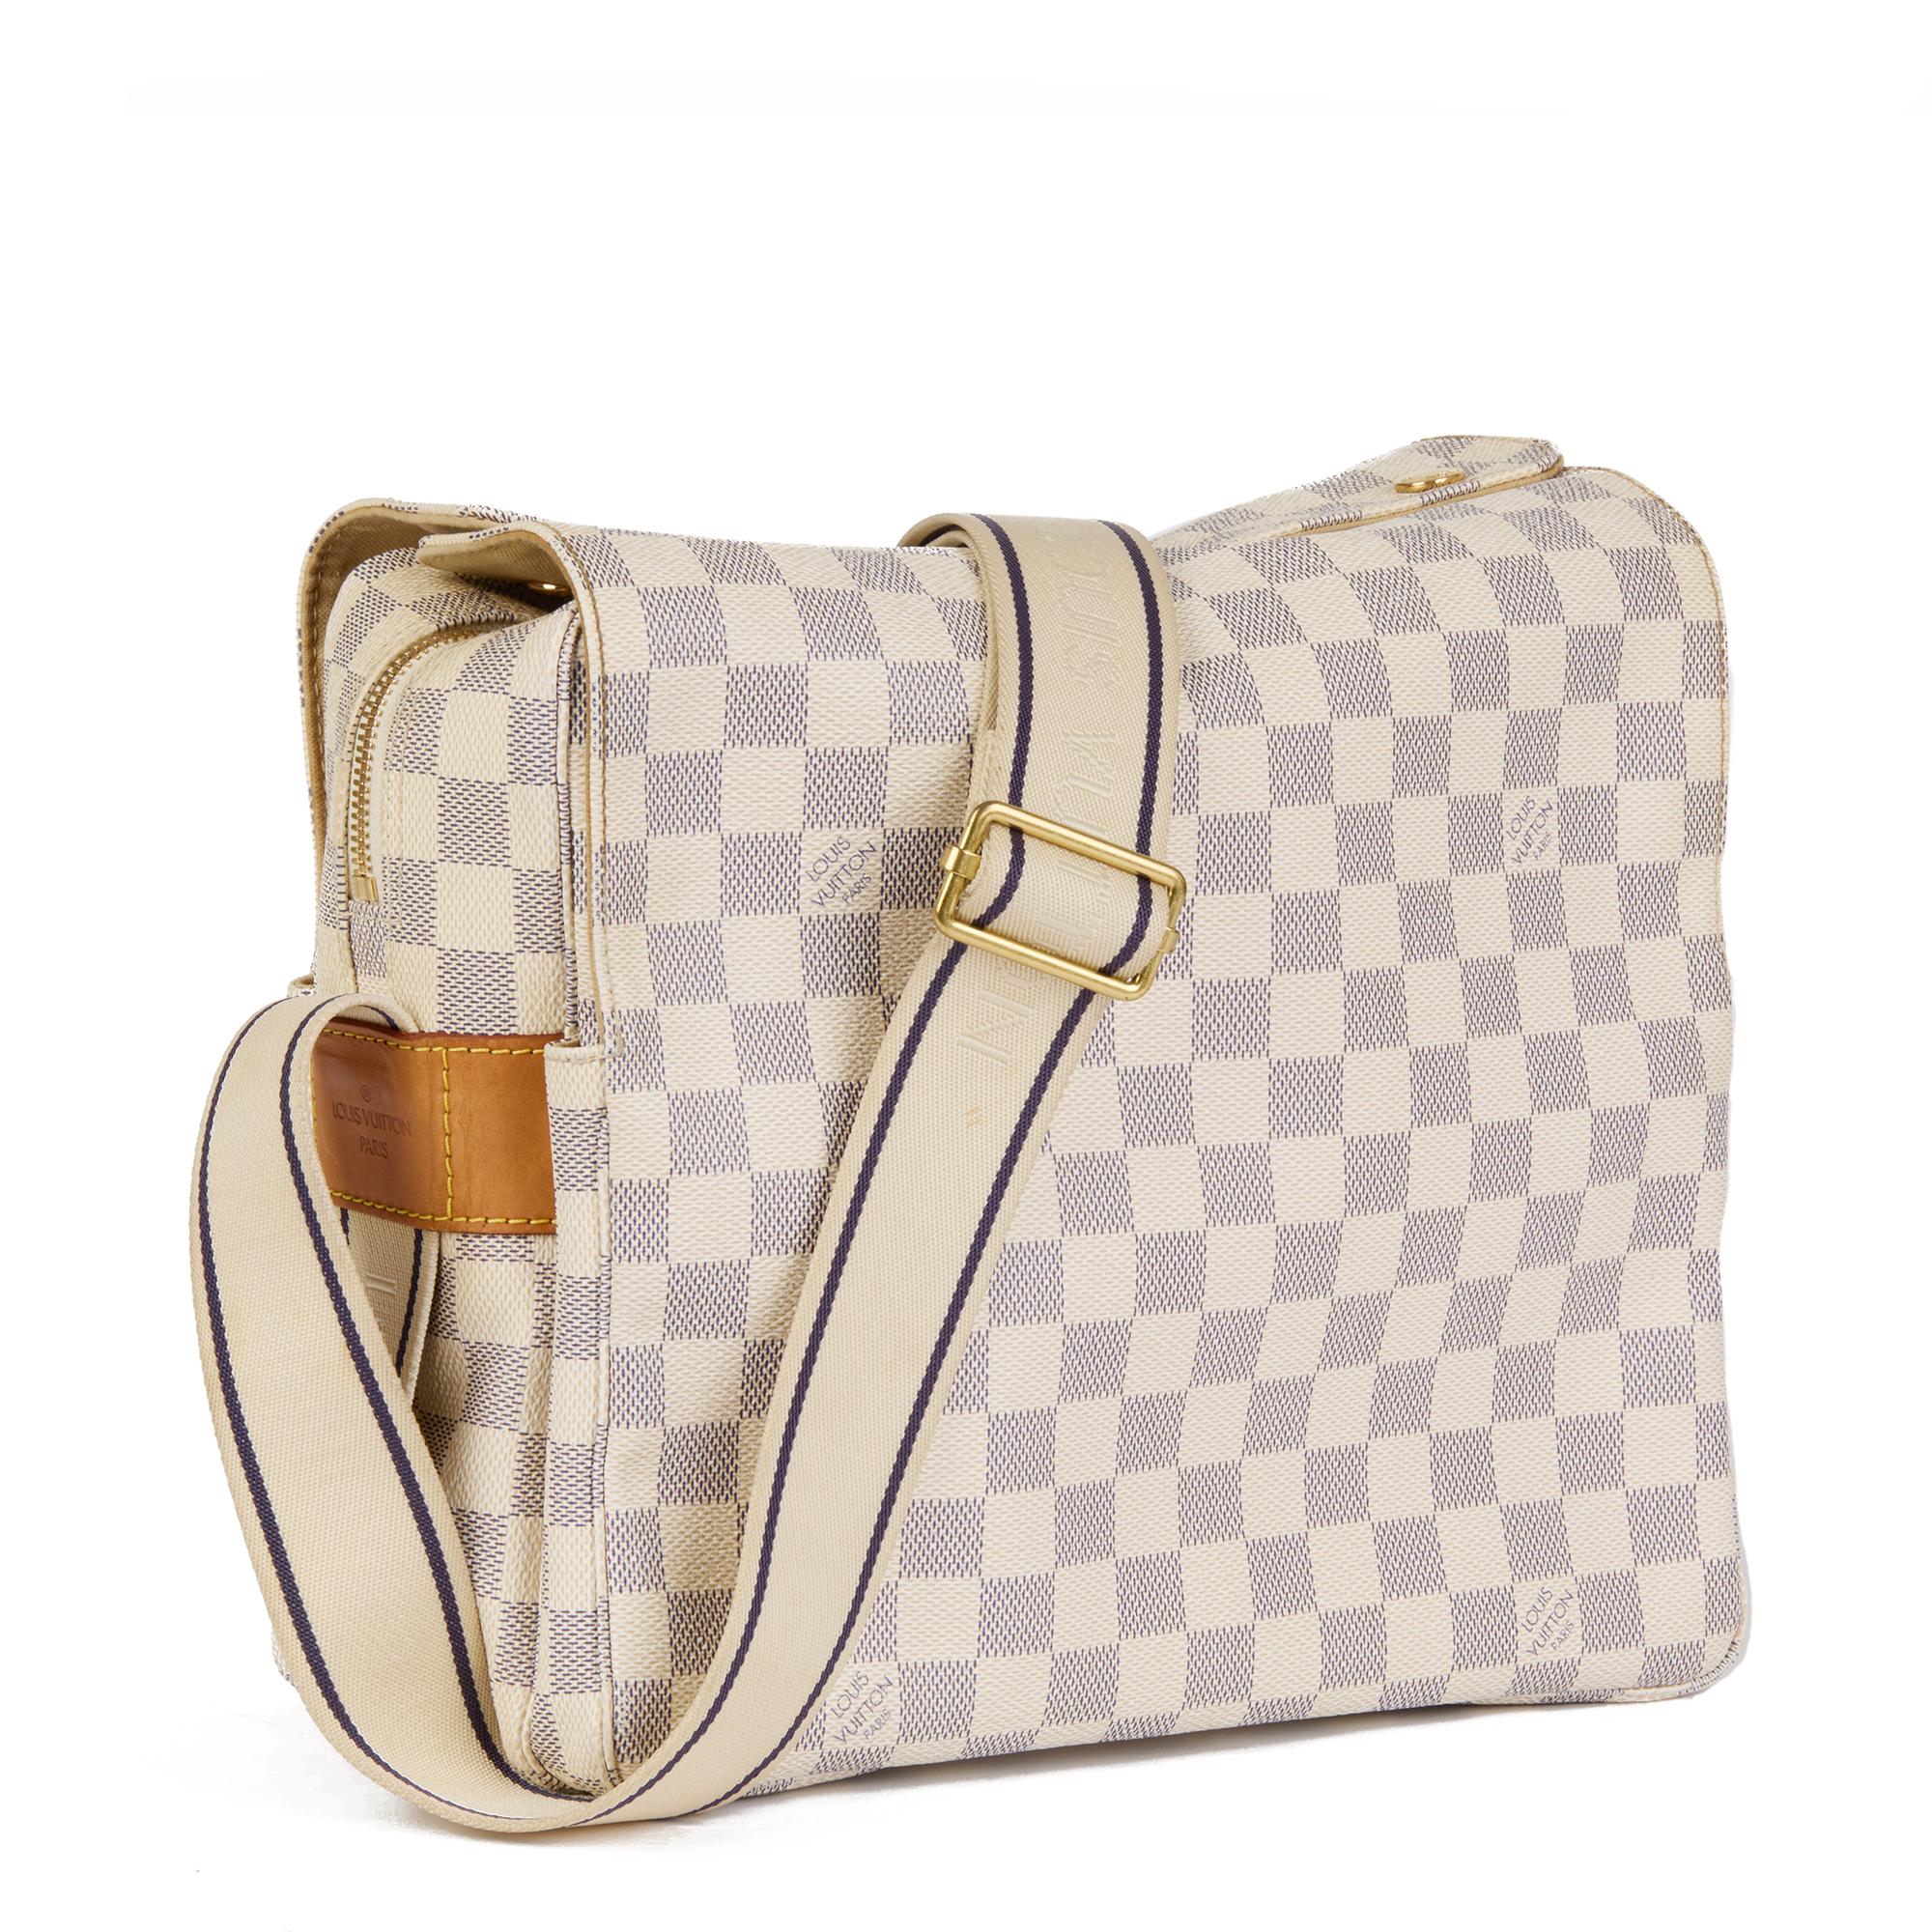 LOUIS VUITTON
Damier Azur Coated Canvas Naviglio

Xupes Reference: CB655
Serial Number: SR4077
Age (Circa): 2007
Authenticity Details: Date Stamp (Made in France)
Gender: Ladies
Type: Shoulder, Crossbody

Colour: Azure
Hardware: Golden